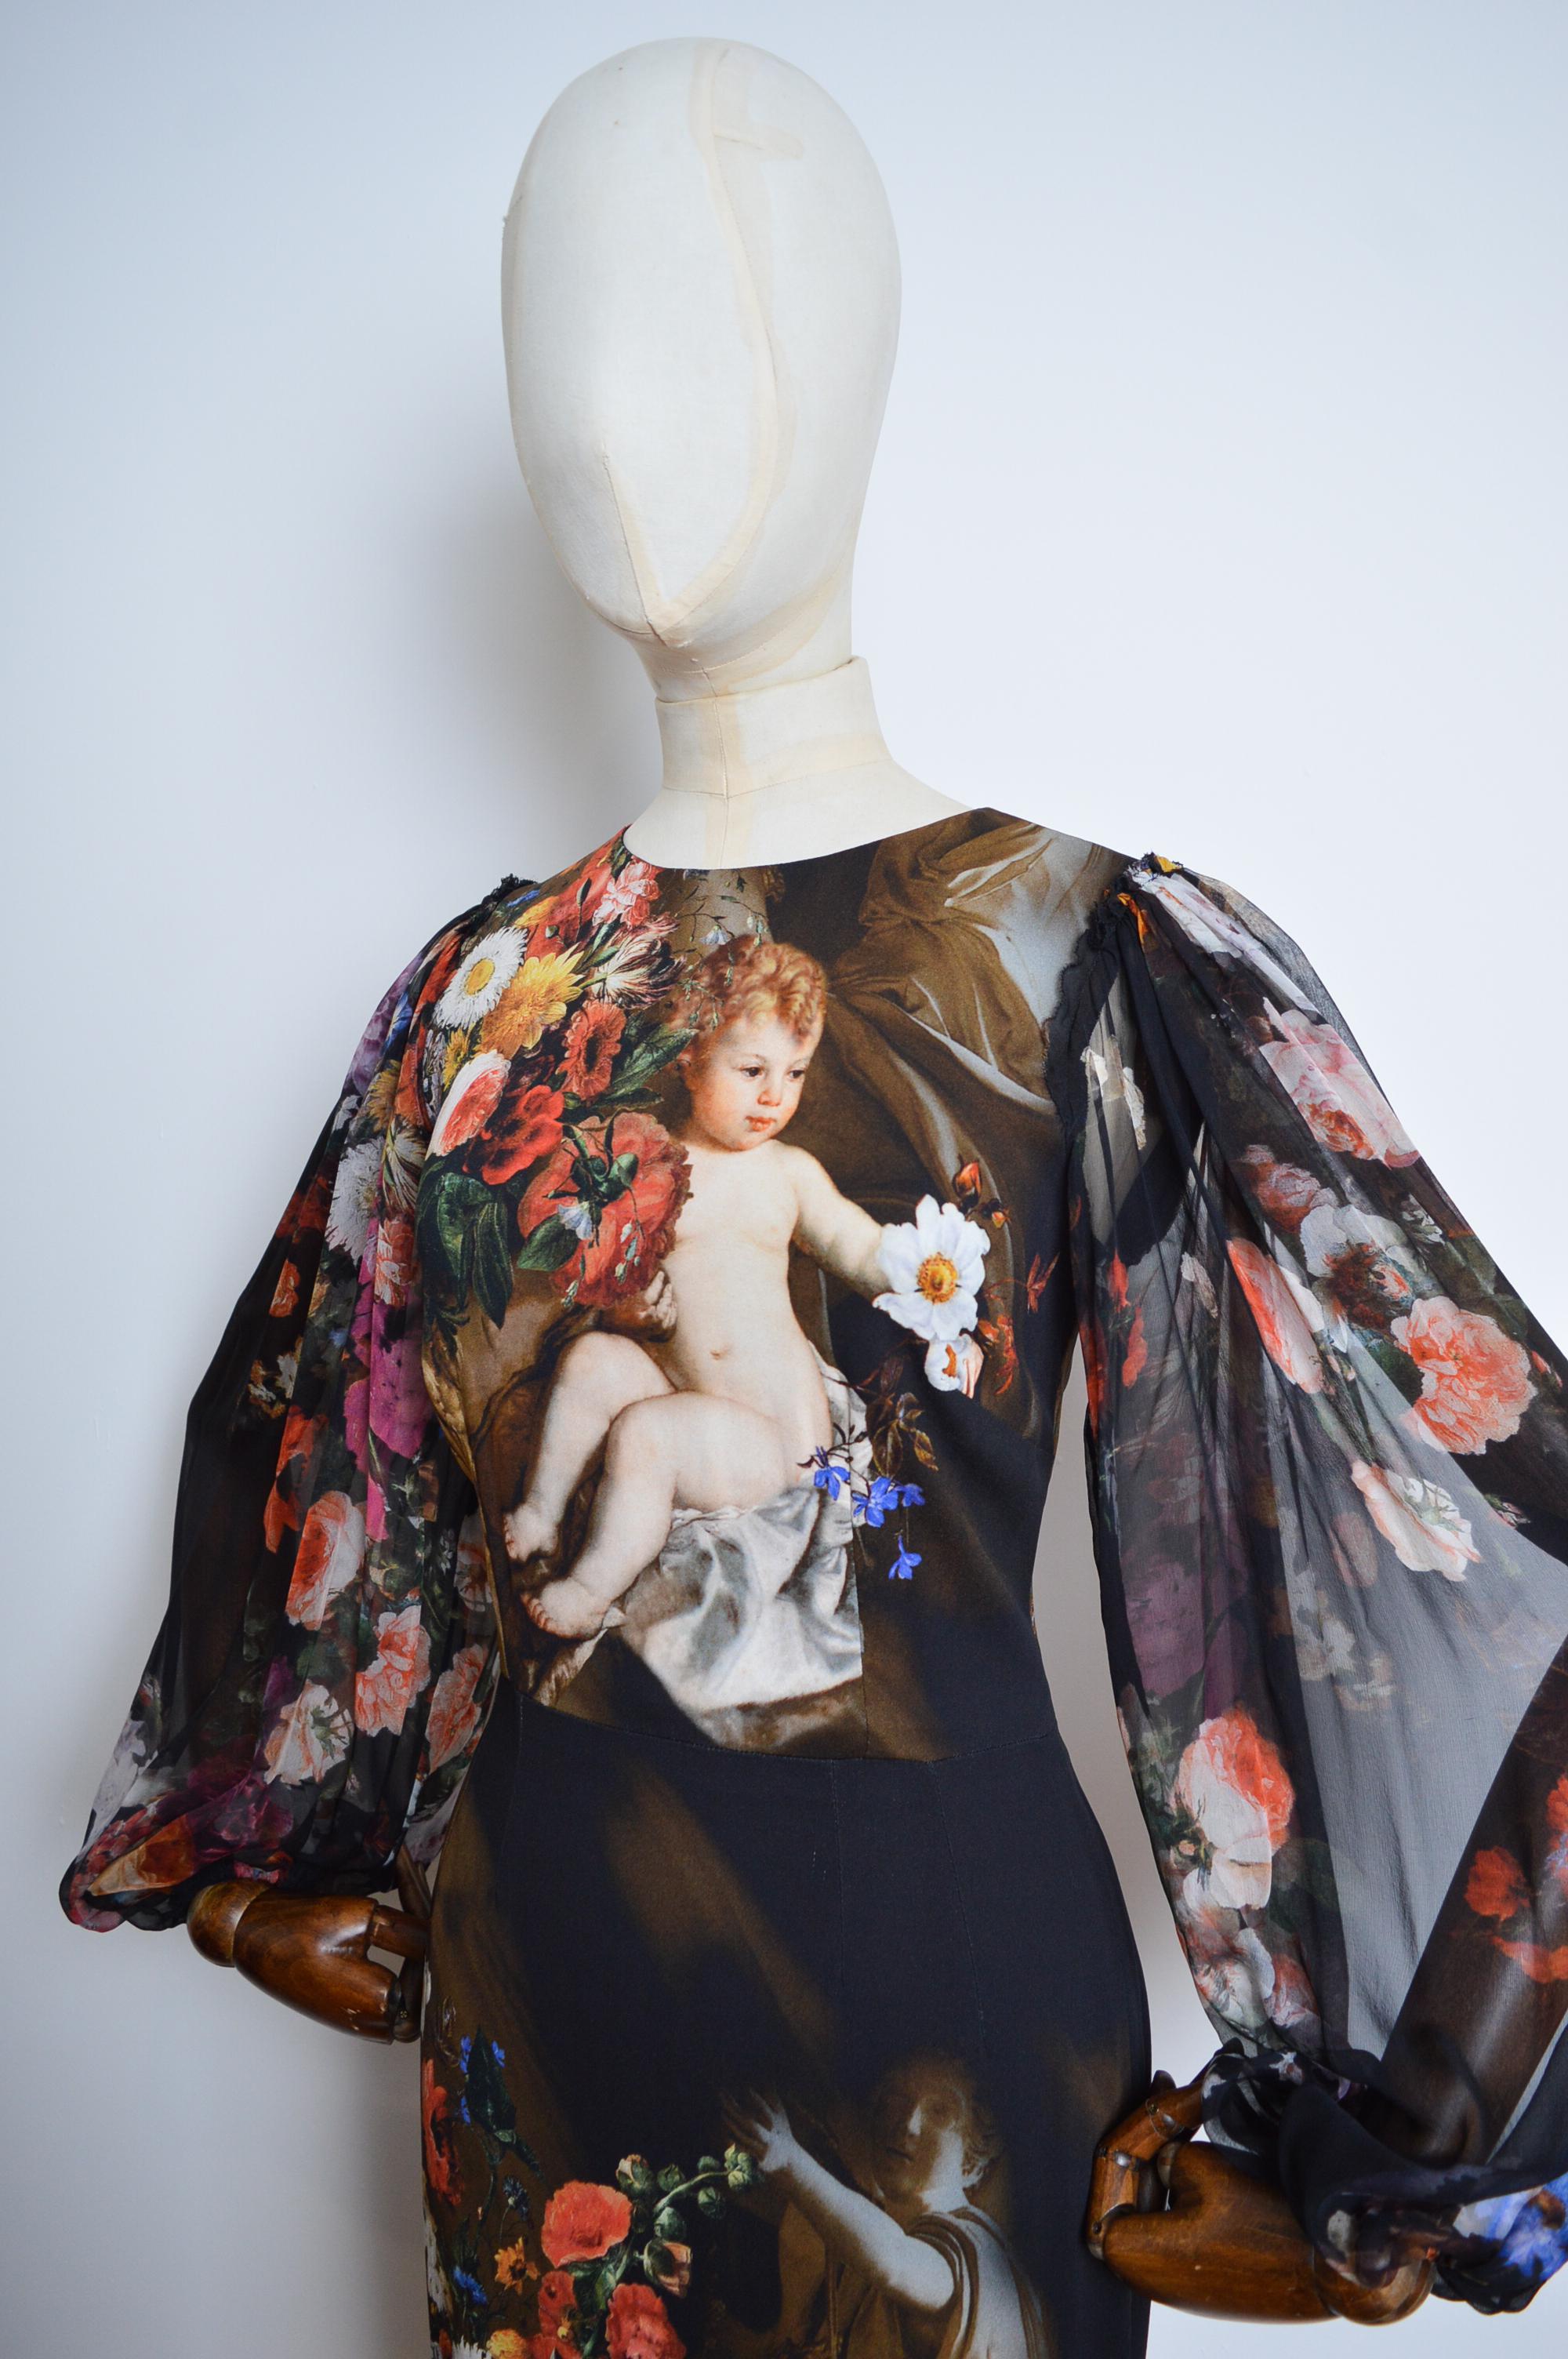 Fall / Winter 2012 DOLCE & GABBANA Runway Floral Baroque sheer Angel Dress In Good Condition For Sale In Sheffield, GB